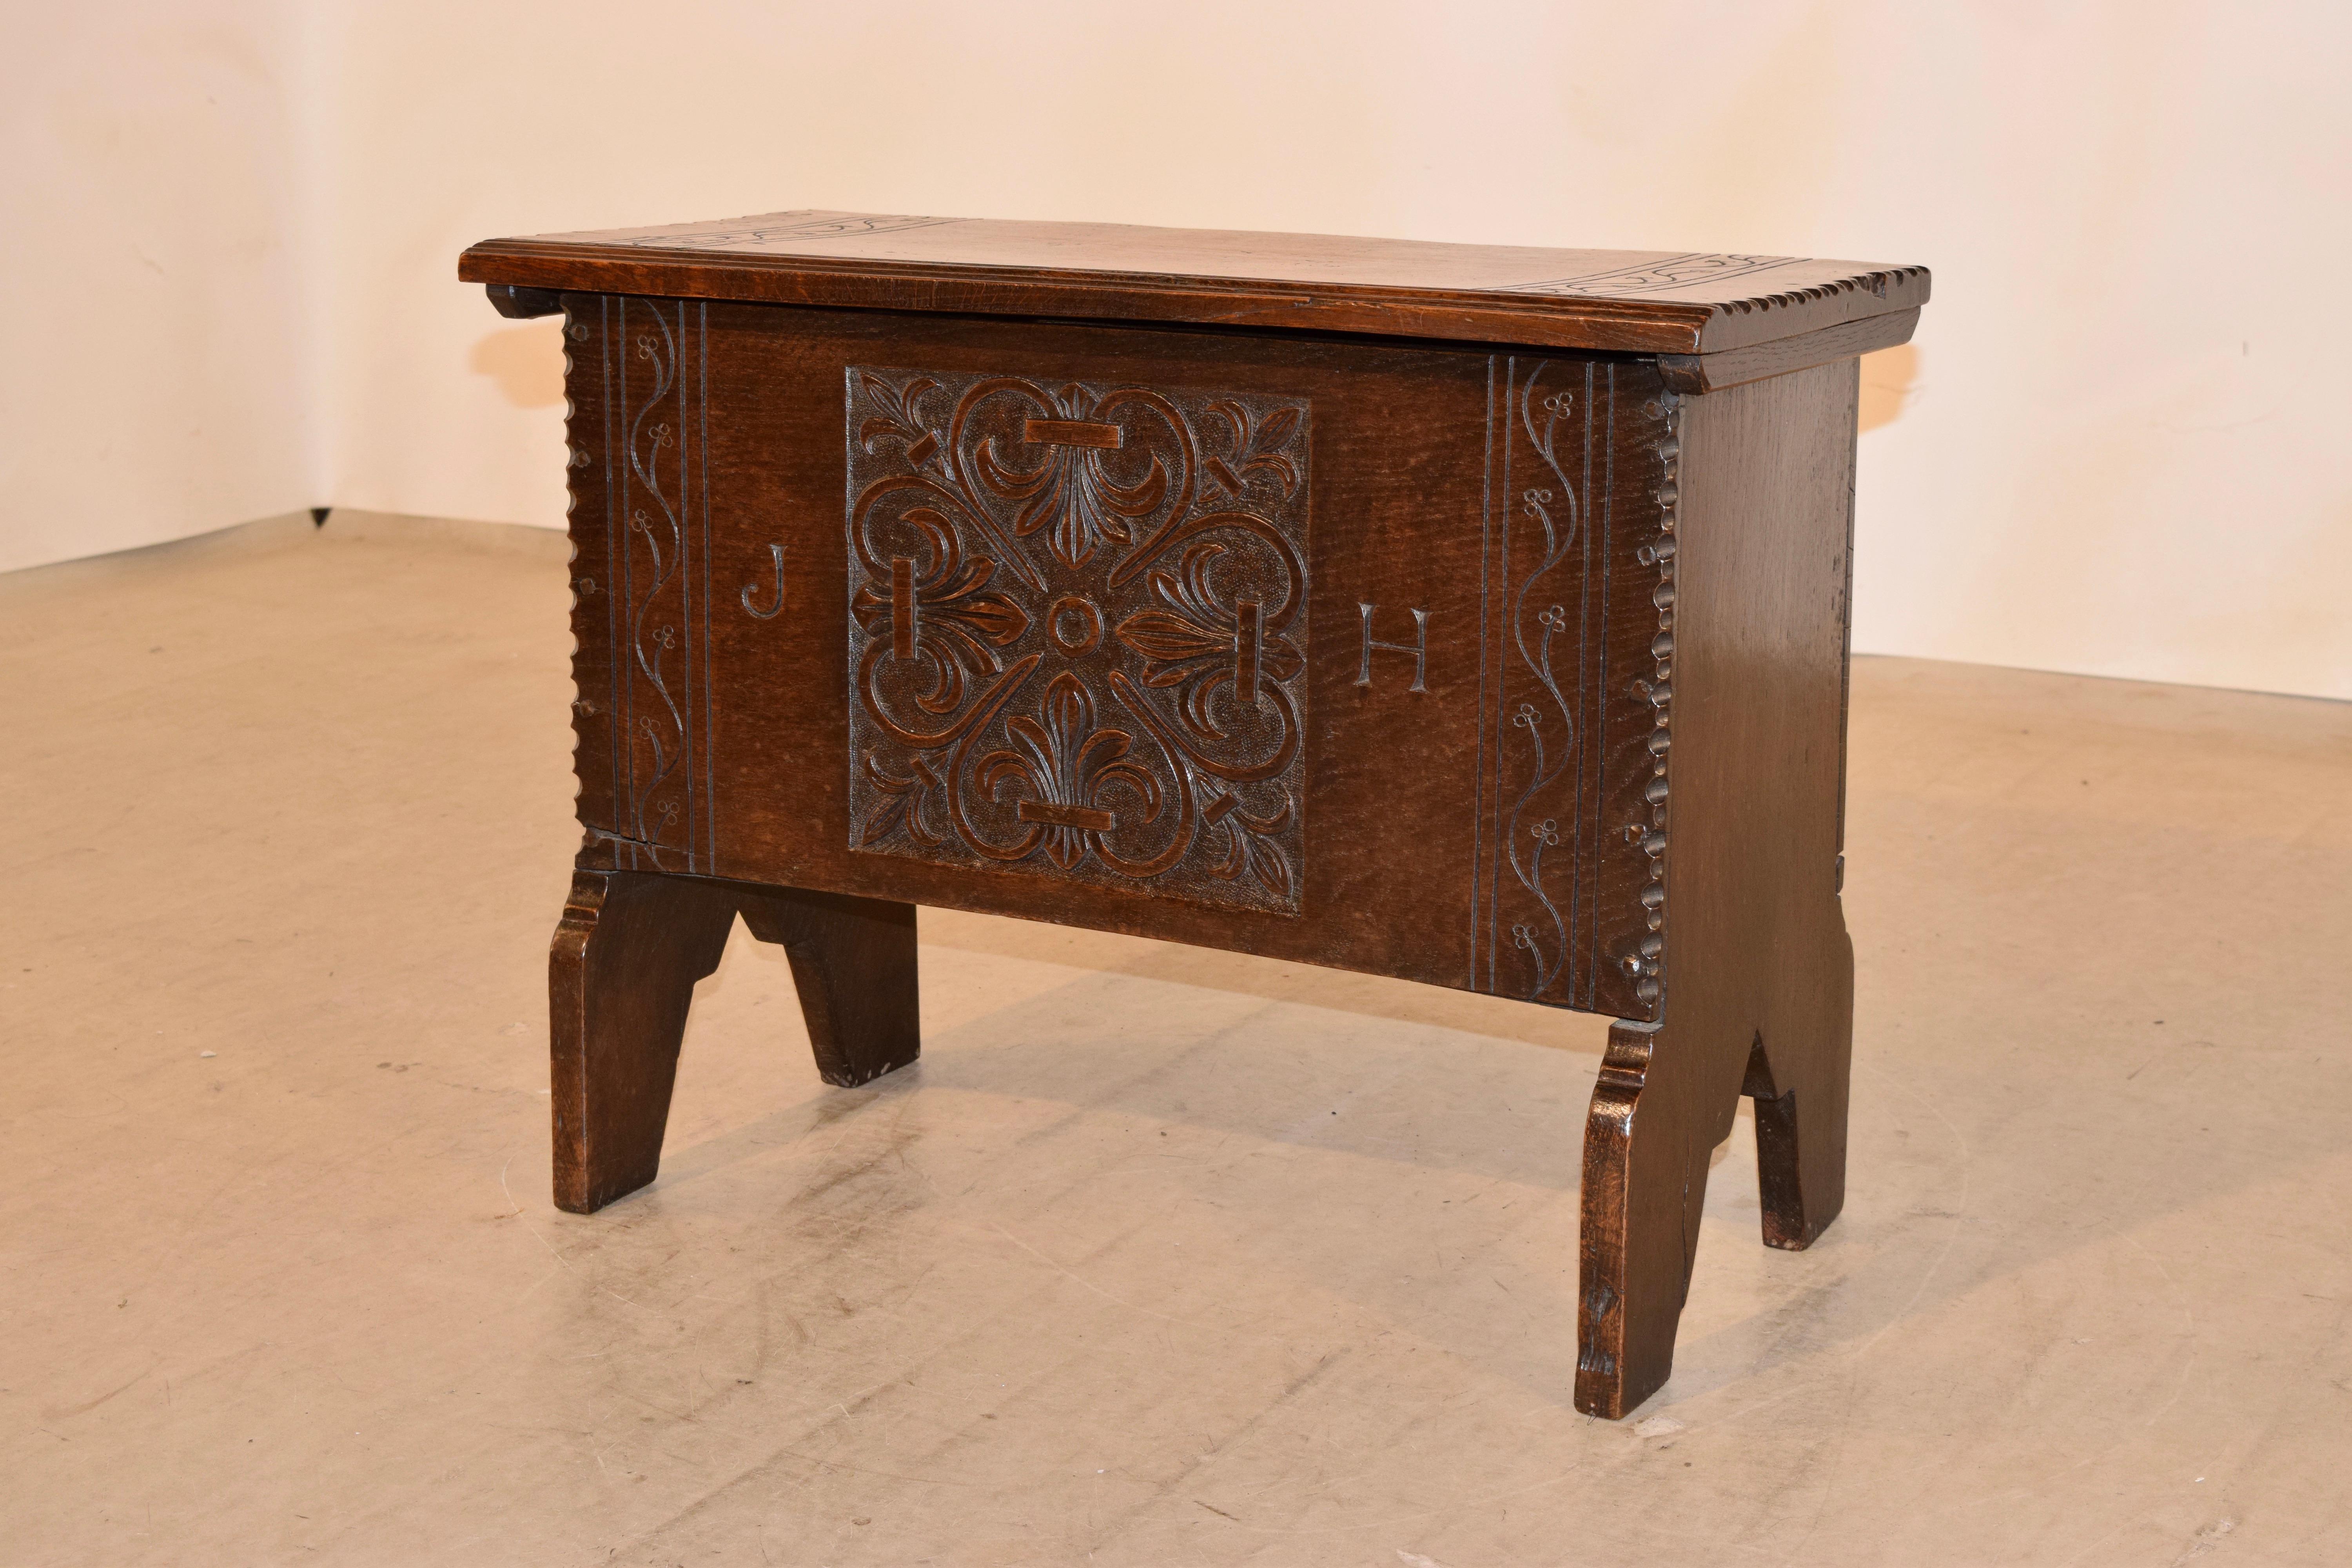 19th century English oak stool with a lift top. The top has hand carved banding, a molded front edge, and pie crust sides. The front has a lovely hand carved decorated central design, flanked by carved banding and the initials J H, along with pie